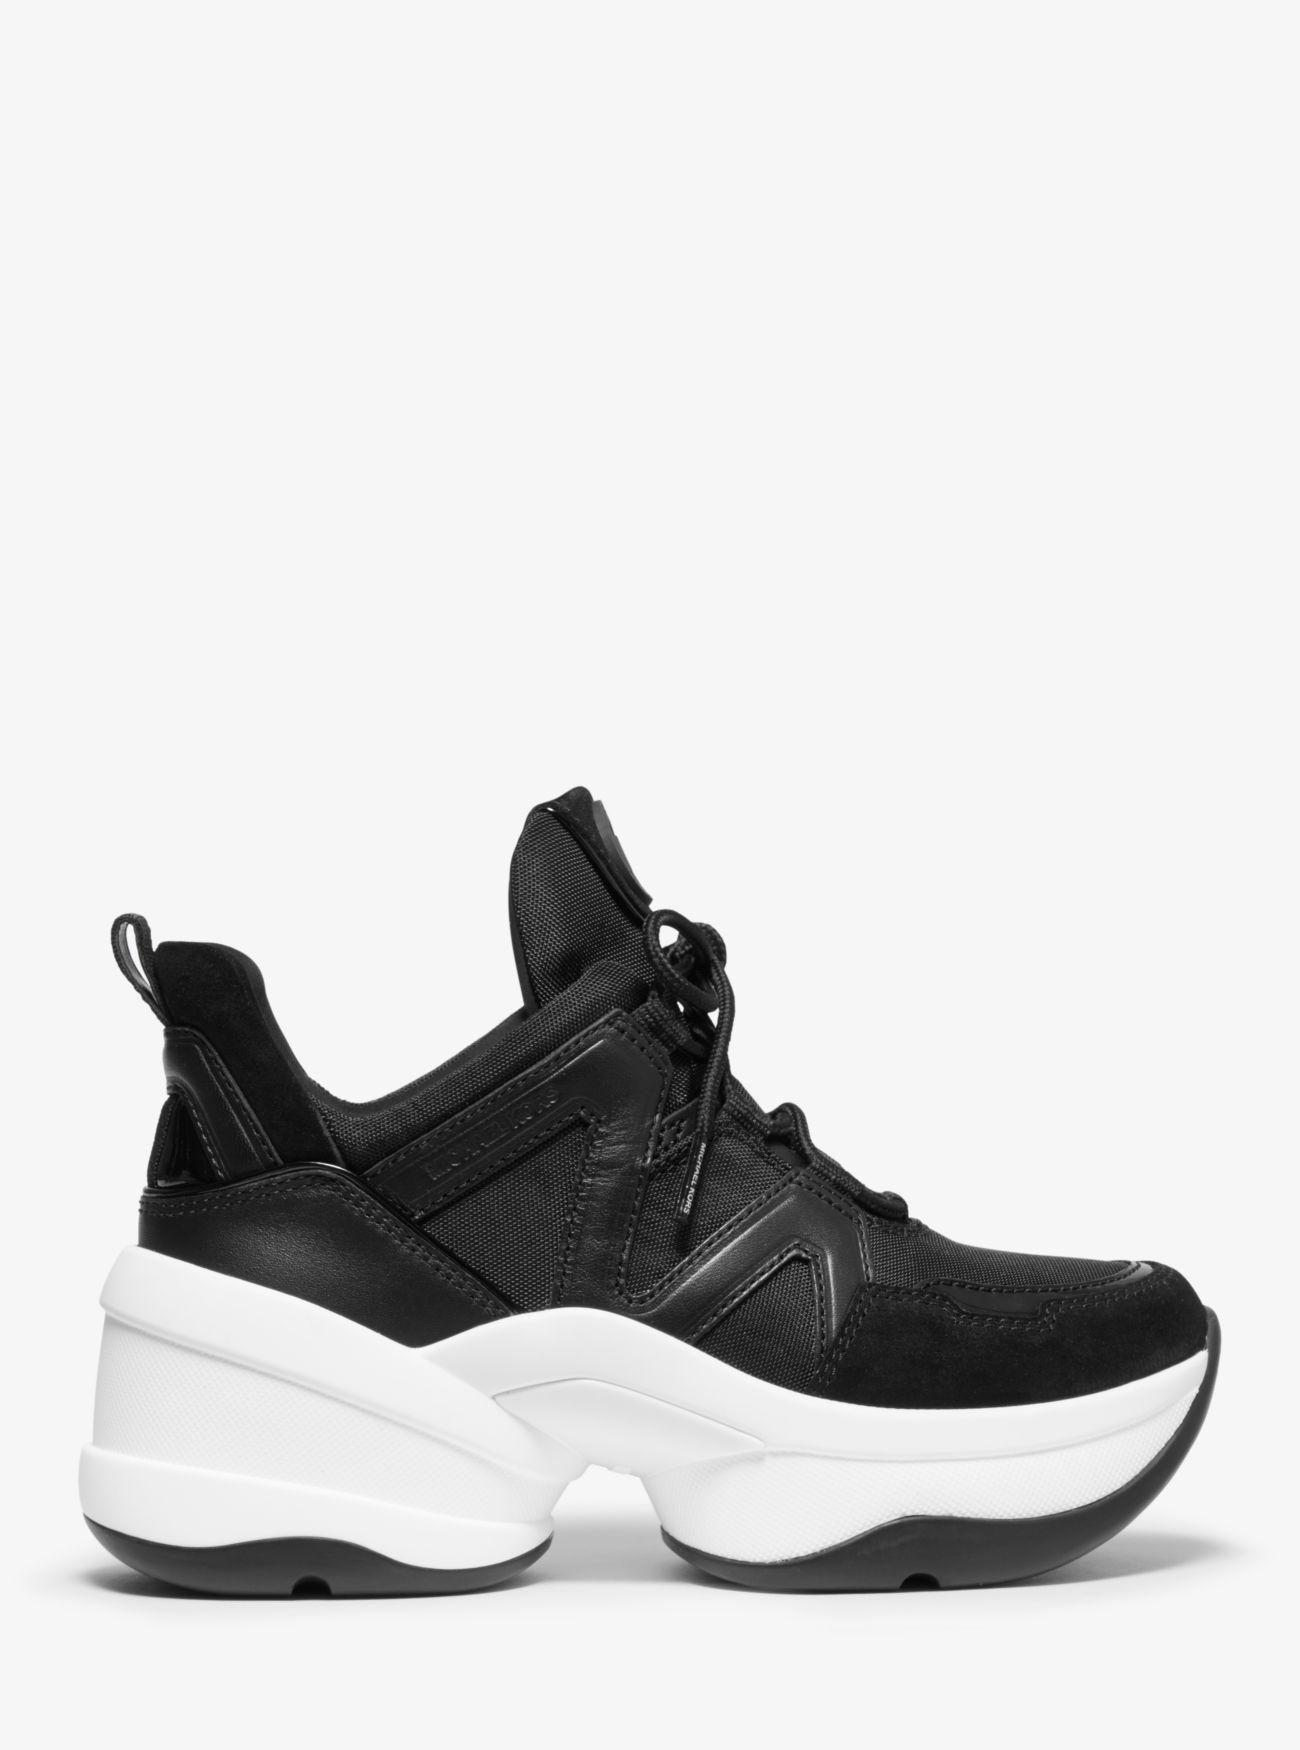 Michael Kors Olympia Canvas And Suede Trainer in Black | Lyst